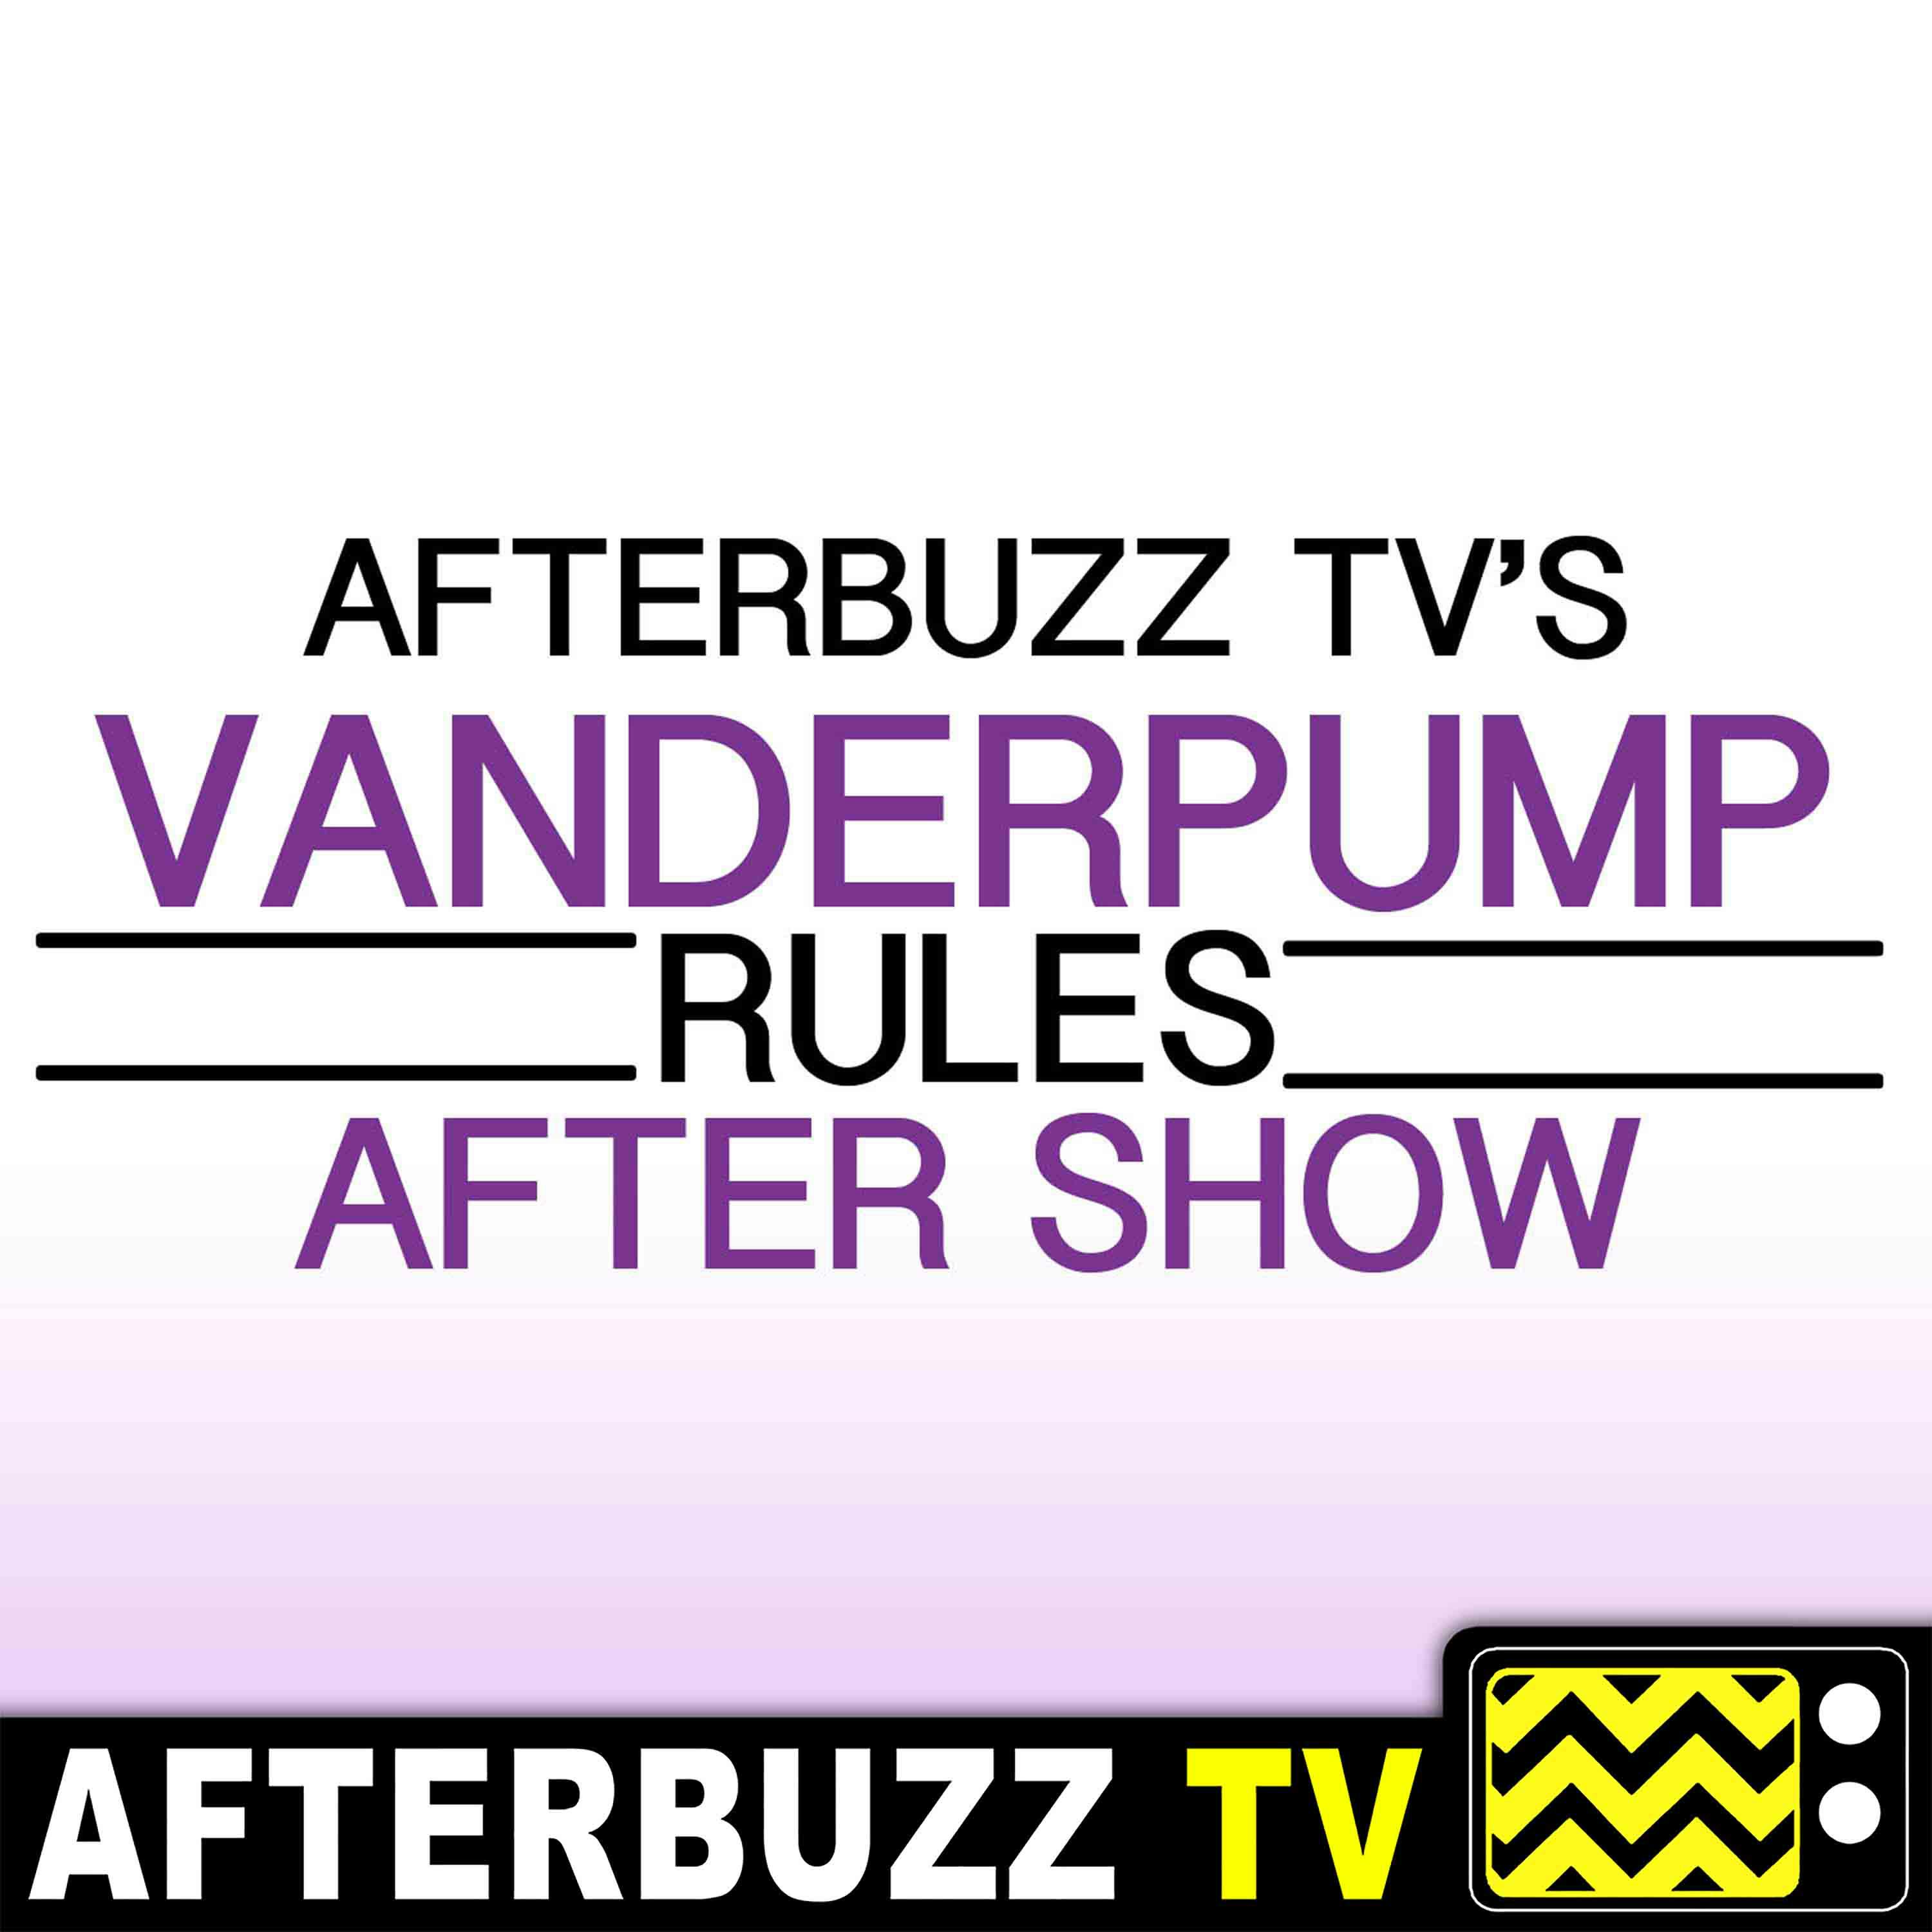 There’s No Shortage Of Toilet Paper In Weho! - S08 E13 'Vanderpump Rules' Recap & Review